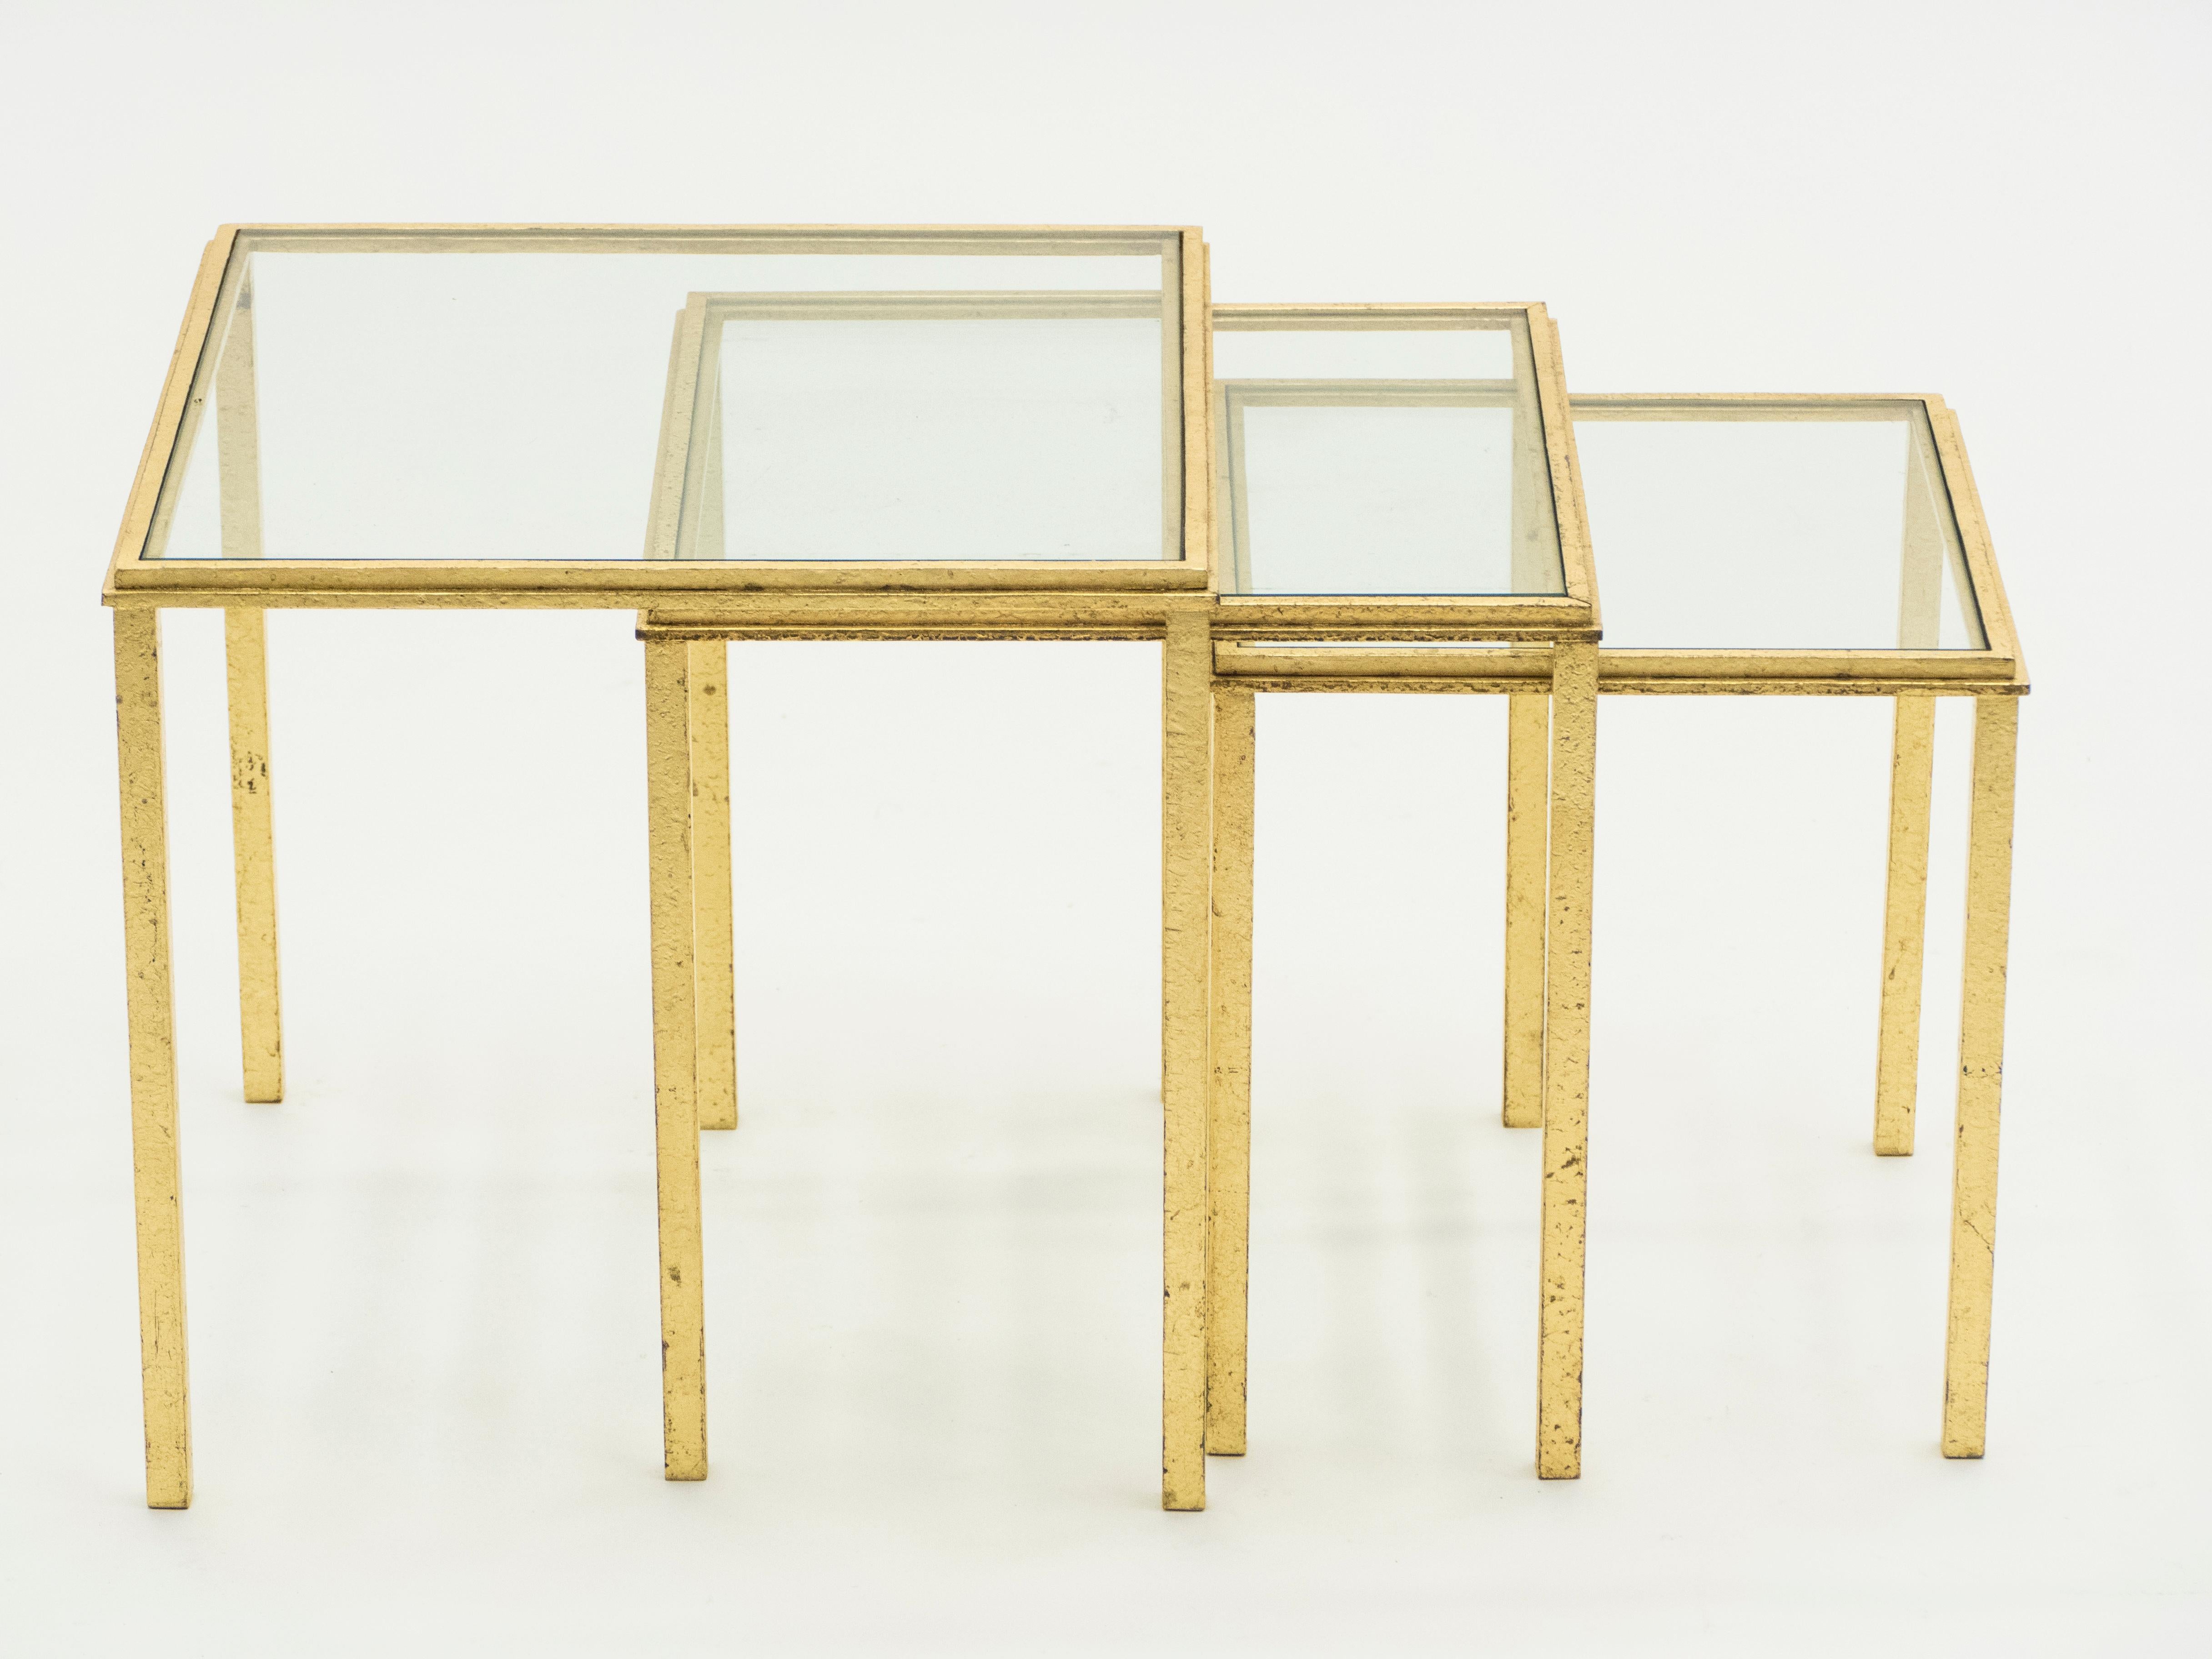 Midcentury Roger Thibier Gilt Wrought Iron Gold Leaf Nesting Tables, 1960s For Sale 6